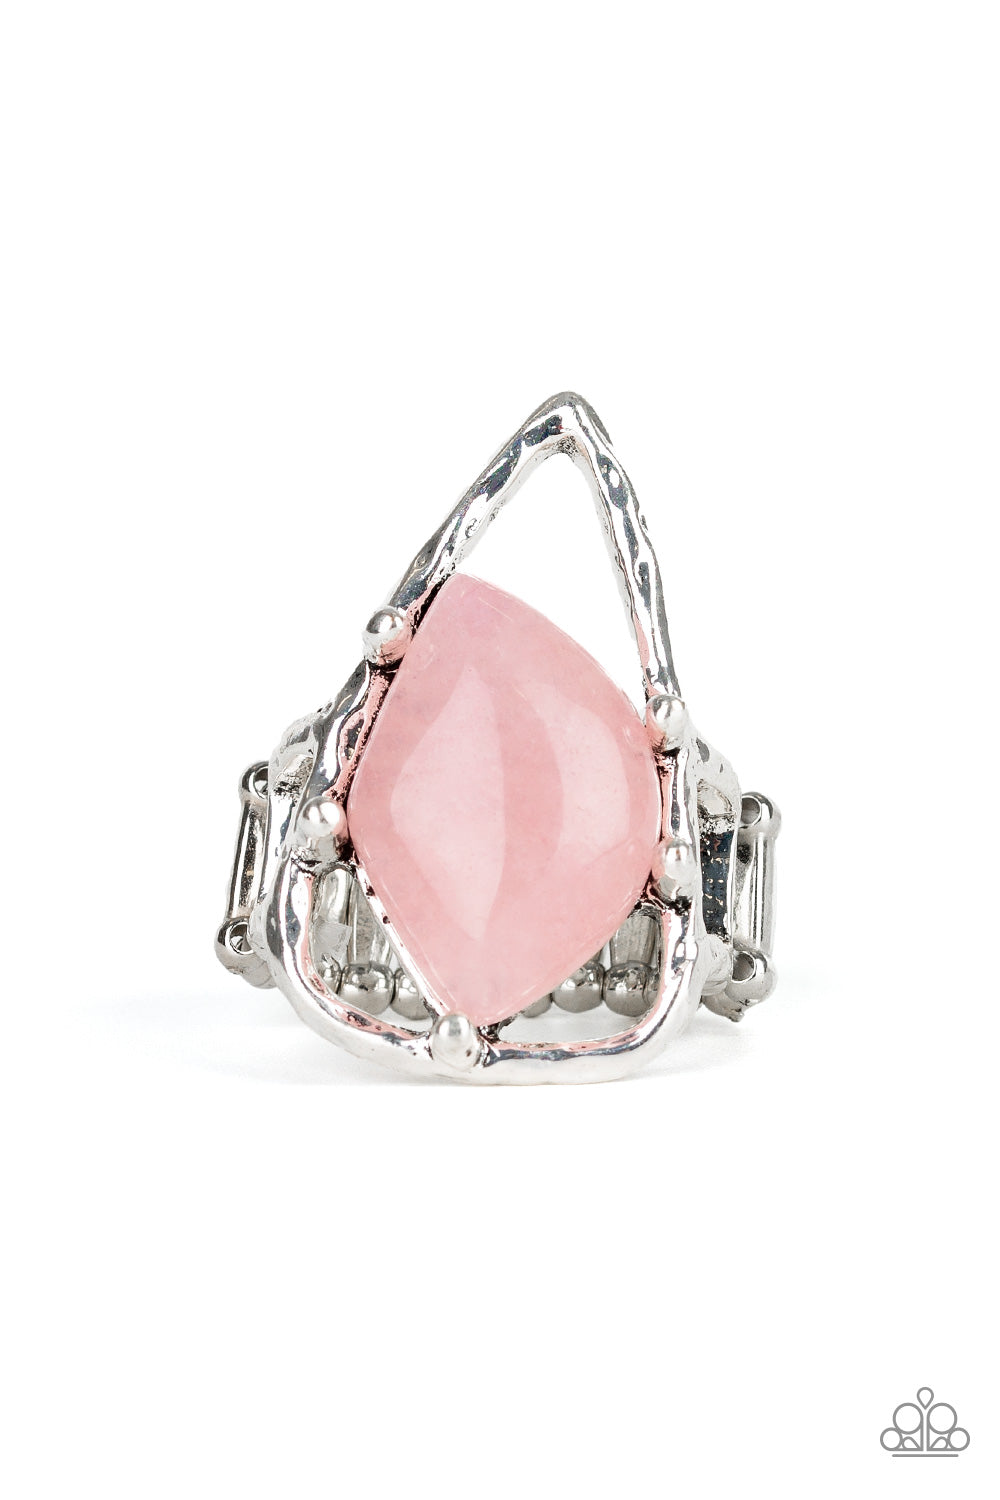 Get The Point Pink Paparazzi Ring Cashmere Pink Jewels - Cashmere Pink Jewels & Accessories, Cashmere Pink Jewels & Accessories - Paparazzi